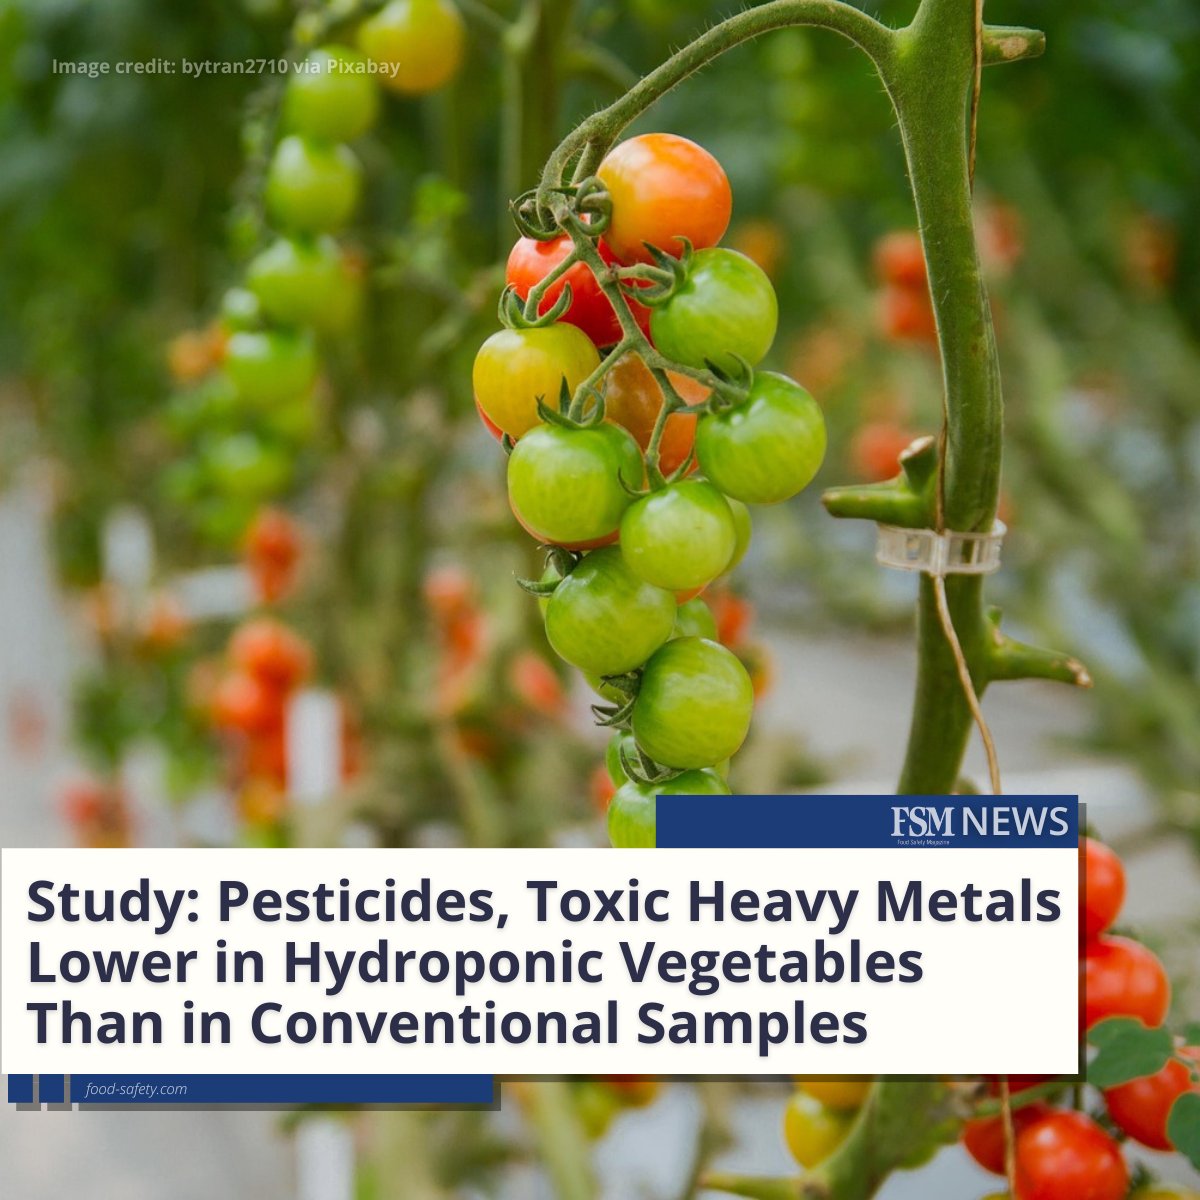 🌱 A recent study comparing the presence of chemical contaminants in conventionally and hydroponically grown produce found pesticide residues and toxic heavy metals in a larger number of conventional samples than in hydroponic samples: brnw.ch/21wJzV4

#foodsafety